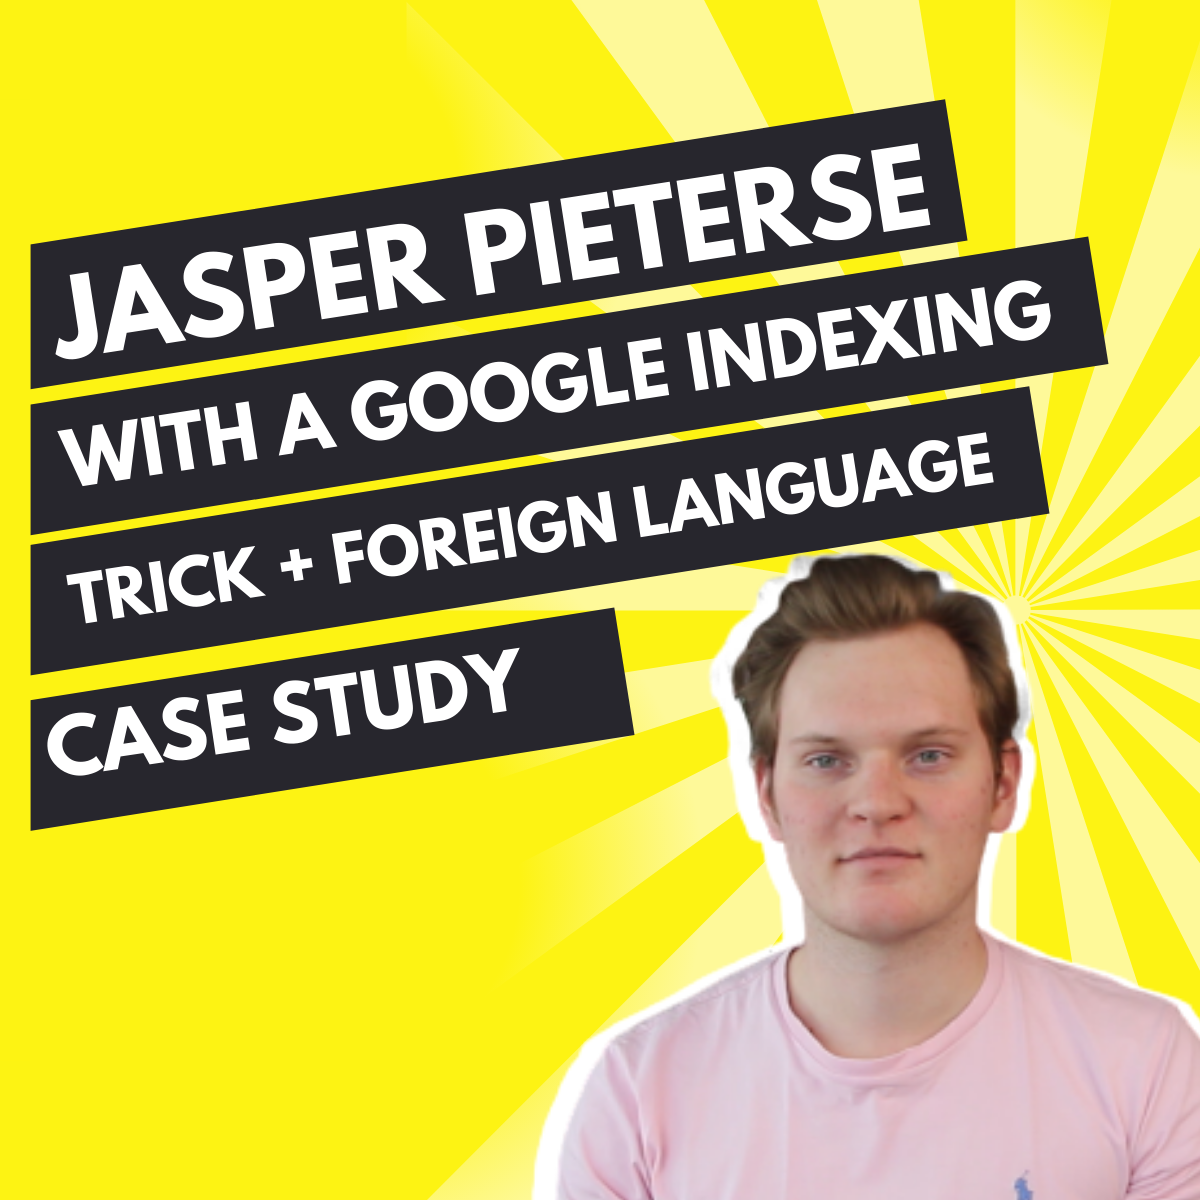 Jasper Pieterse with a Google indexing trick + foreign language case study